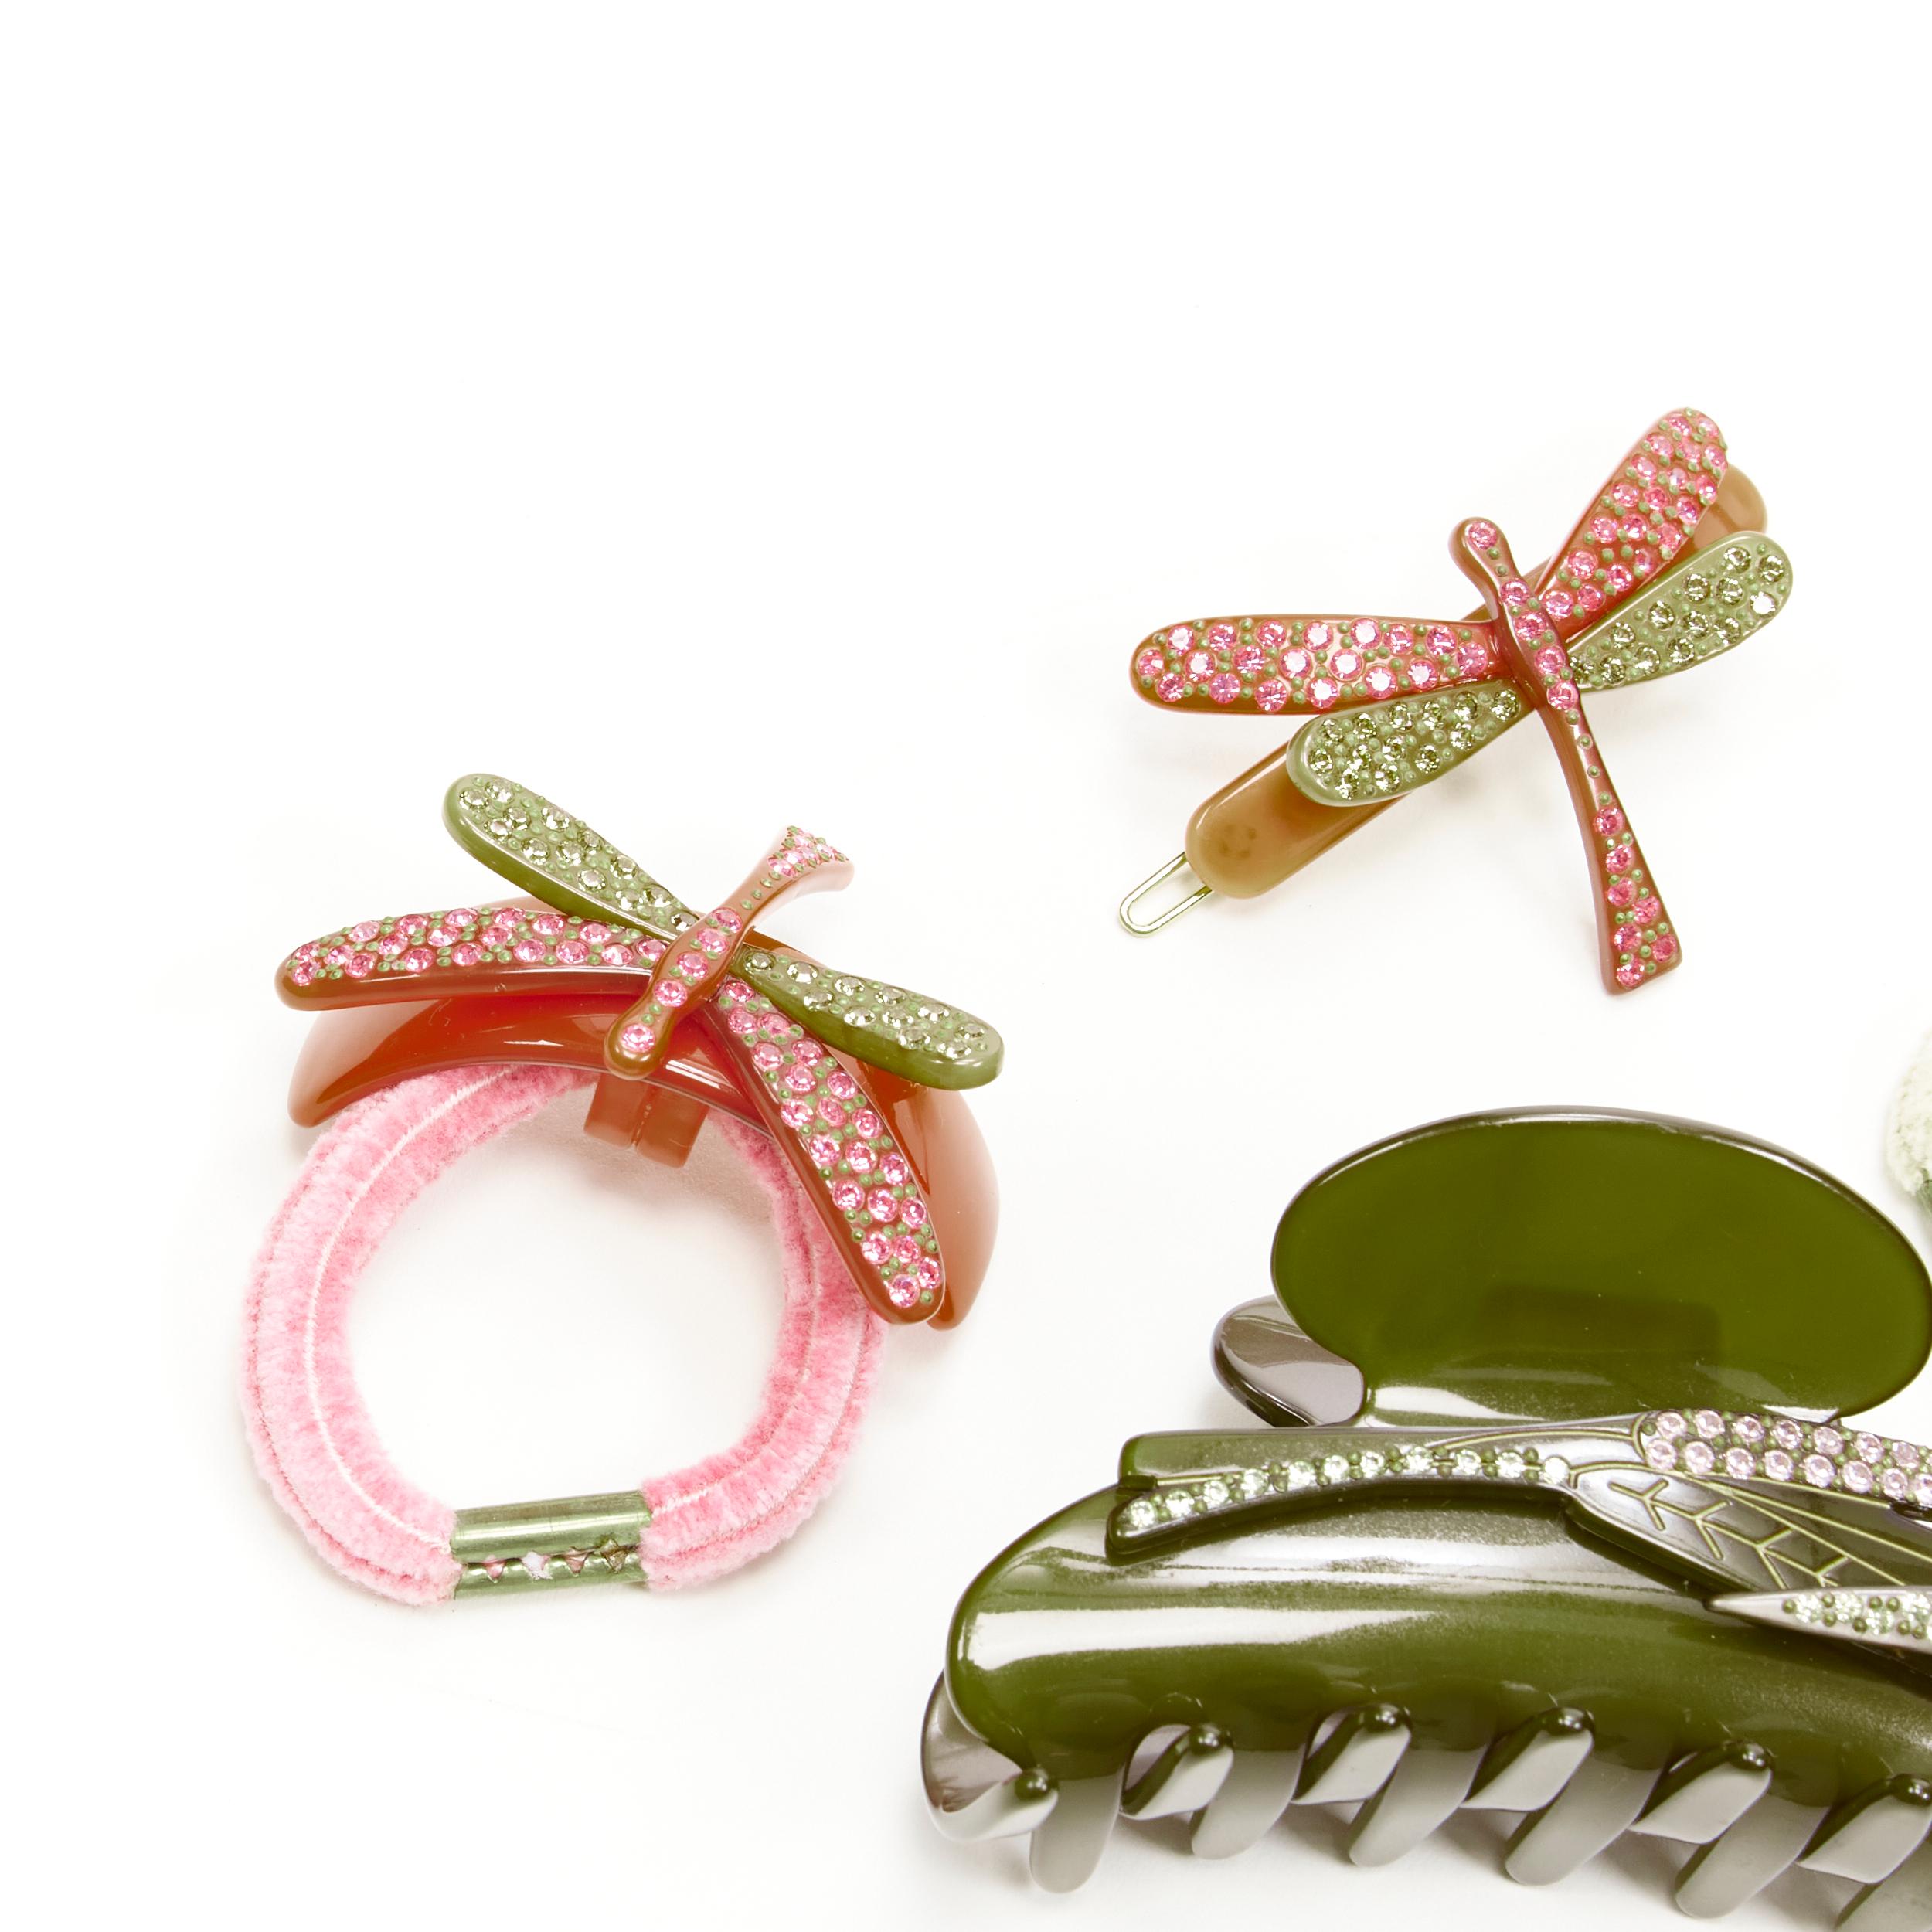 CHIC & MODE Alexandre Zouari pink green dragonfly flower hair clamp clip tie X4
Reference: ANWU/A00252
Brand: Chic and Mode
Designer: Alexandre Zouari
Material: Plastic, Metal
Color: Pink, Brown
Closure: Clip On
Extra Details: Large clip: ~9cm.